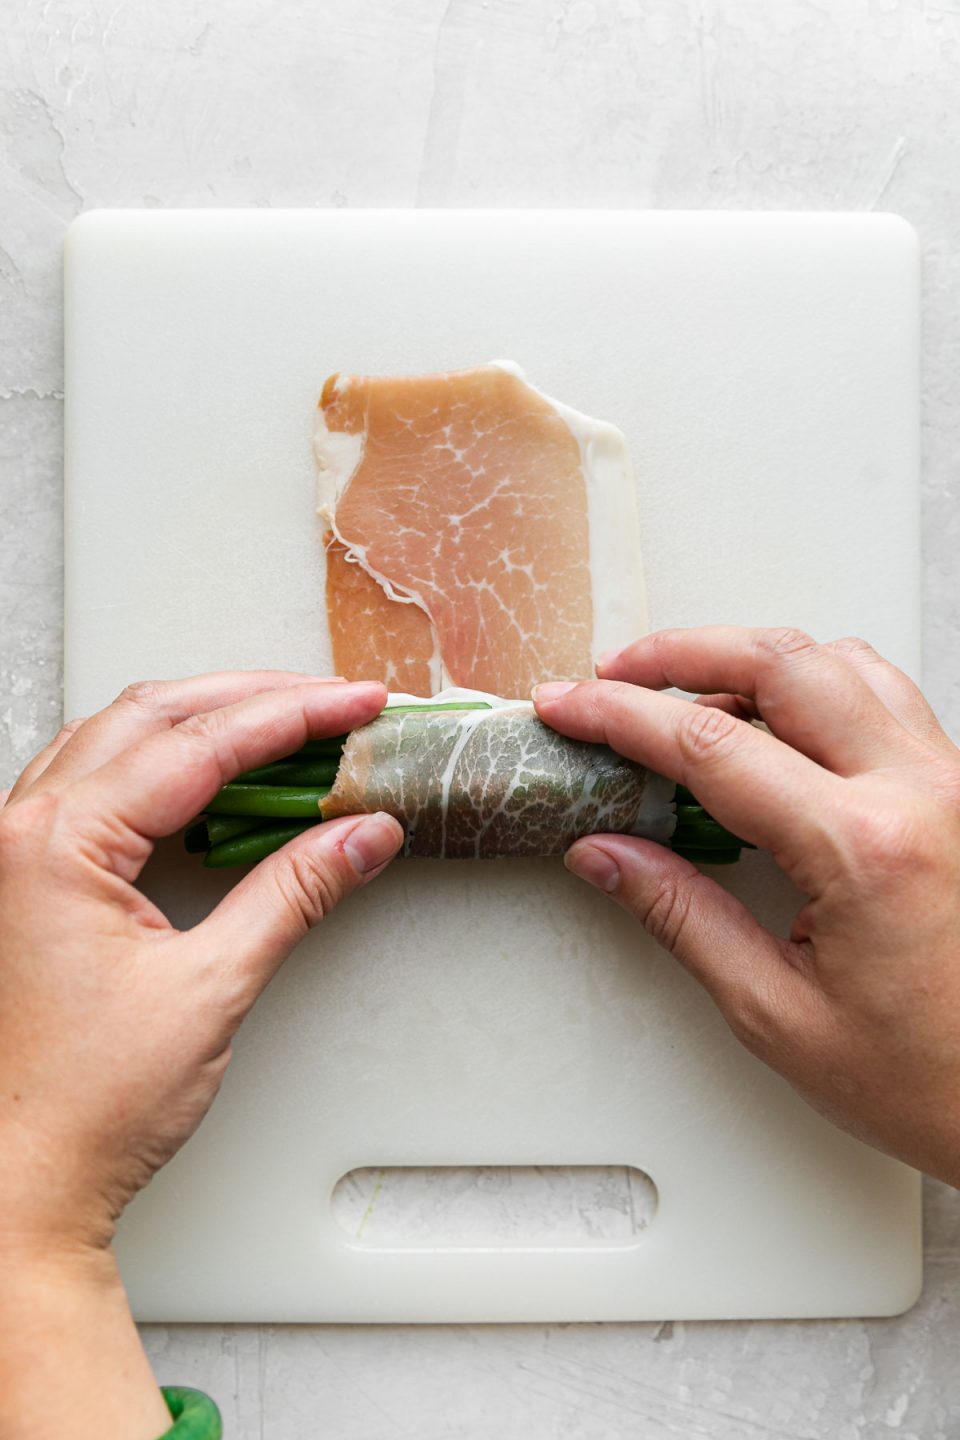 A woman's hands work to slowly roll and wrap a pile of neatly arranged green beans, running in the same direction, with a single piece of prosciutto that is resting atop a white cutting board. The cutting board sits atop a creamy white plaster surface.